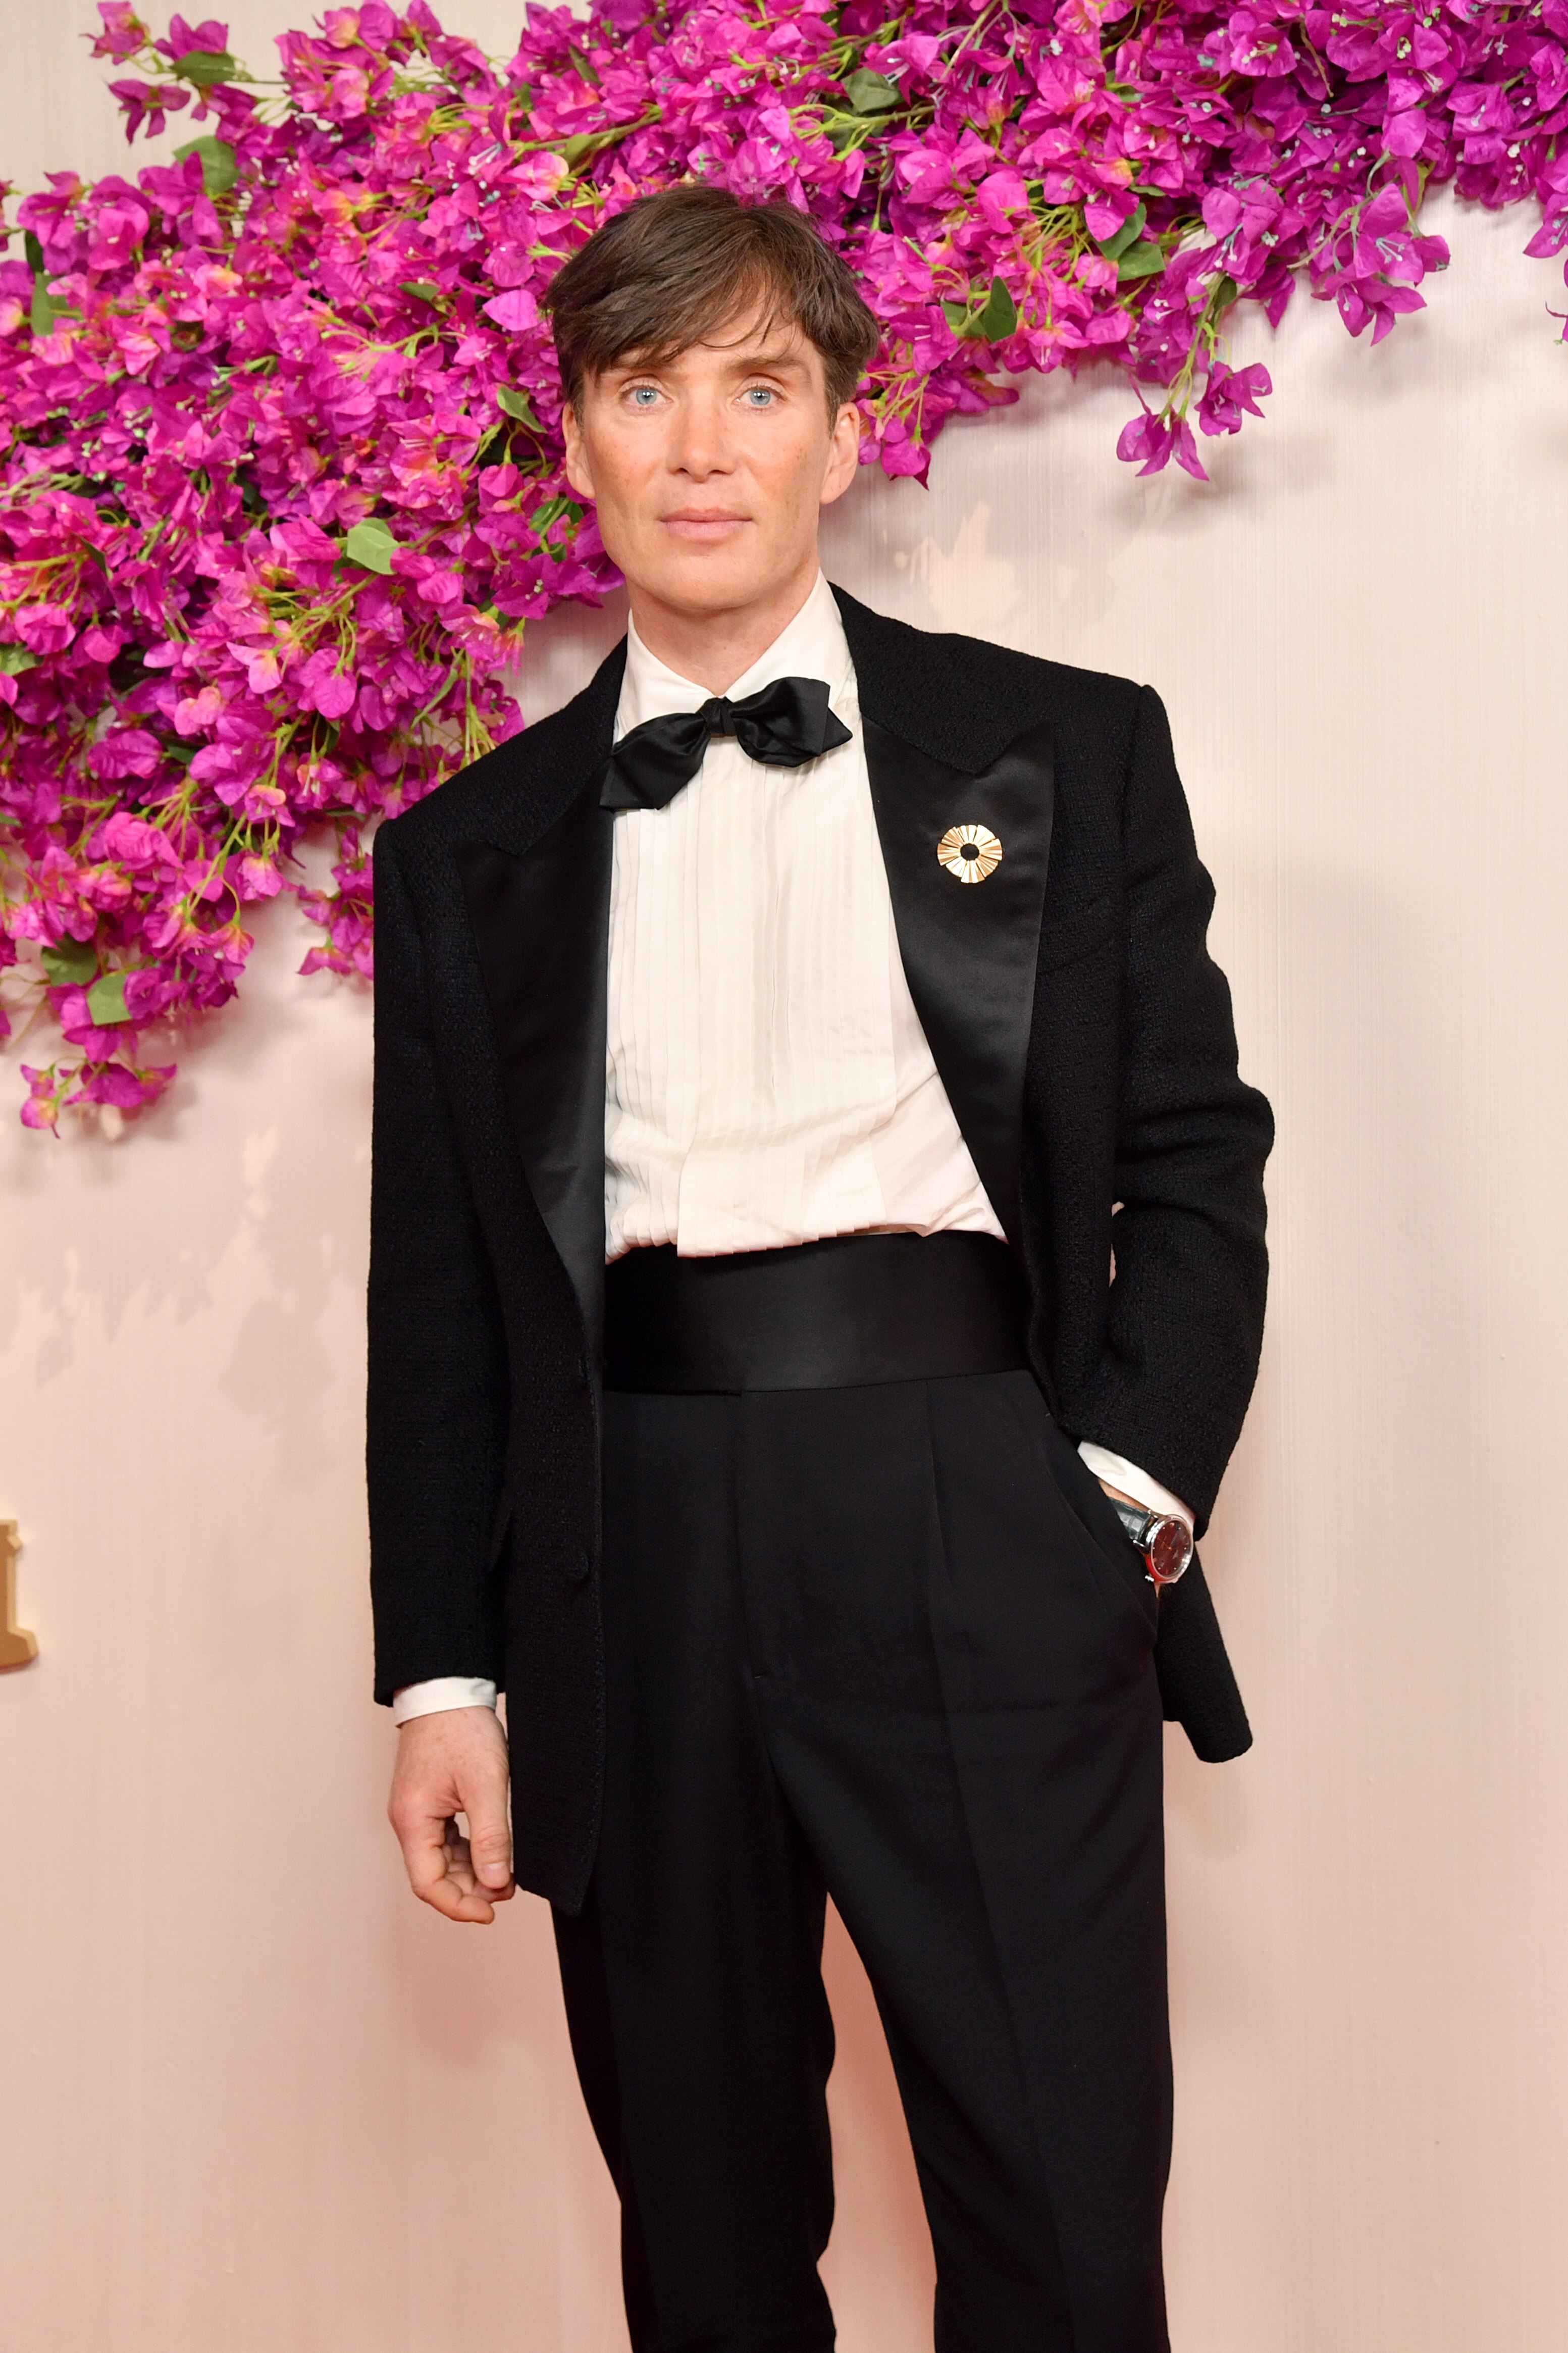 Cillian Murphy in a black suit at the Oscars red carpet